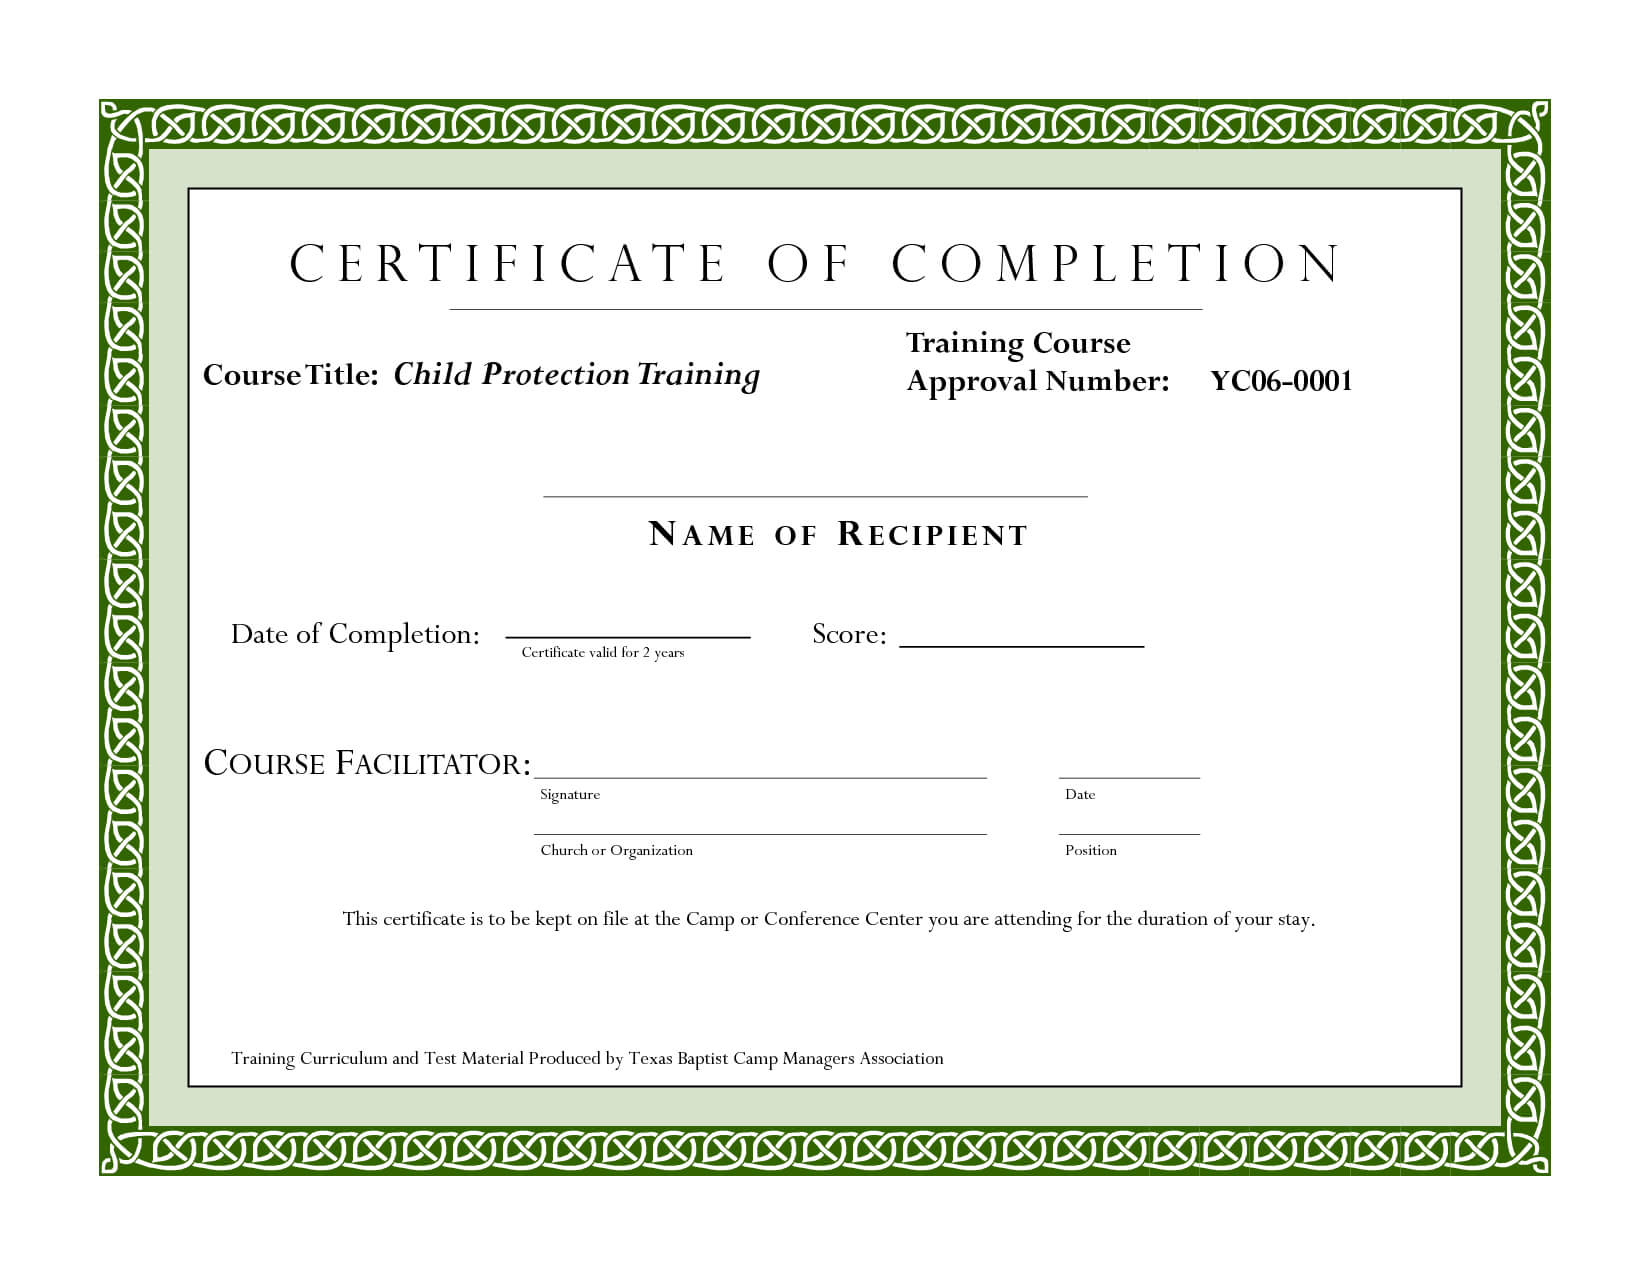 Course Completion Certificate Template | Certificate Of For Masters Degree Certificate Template